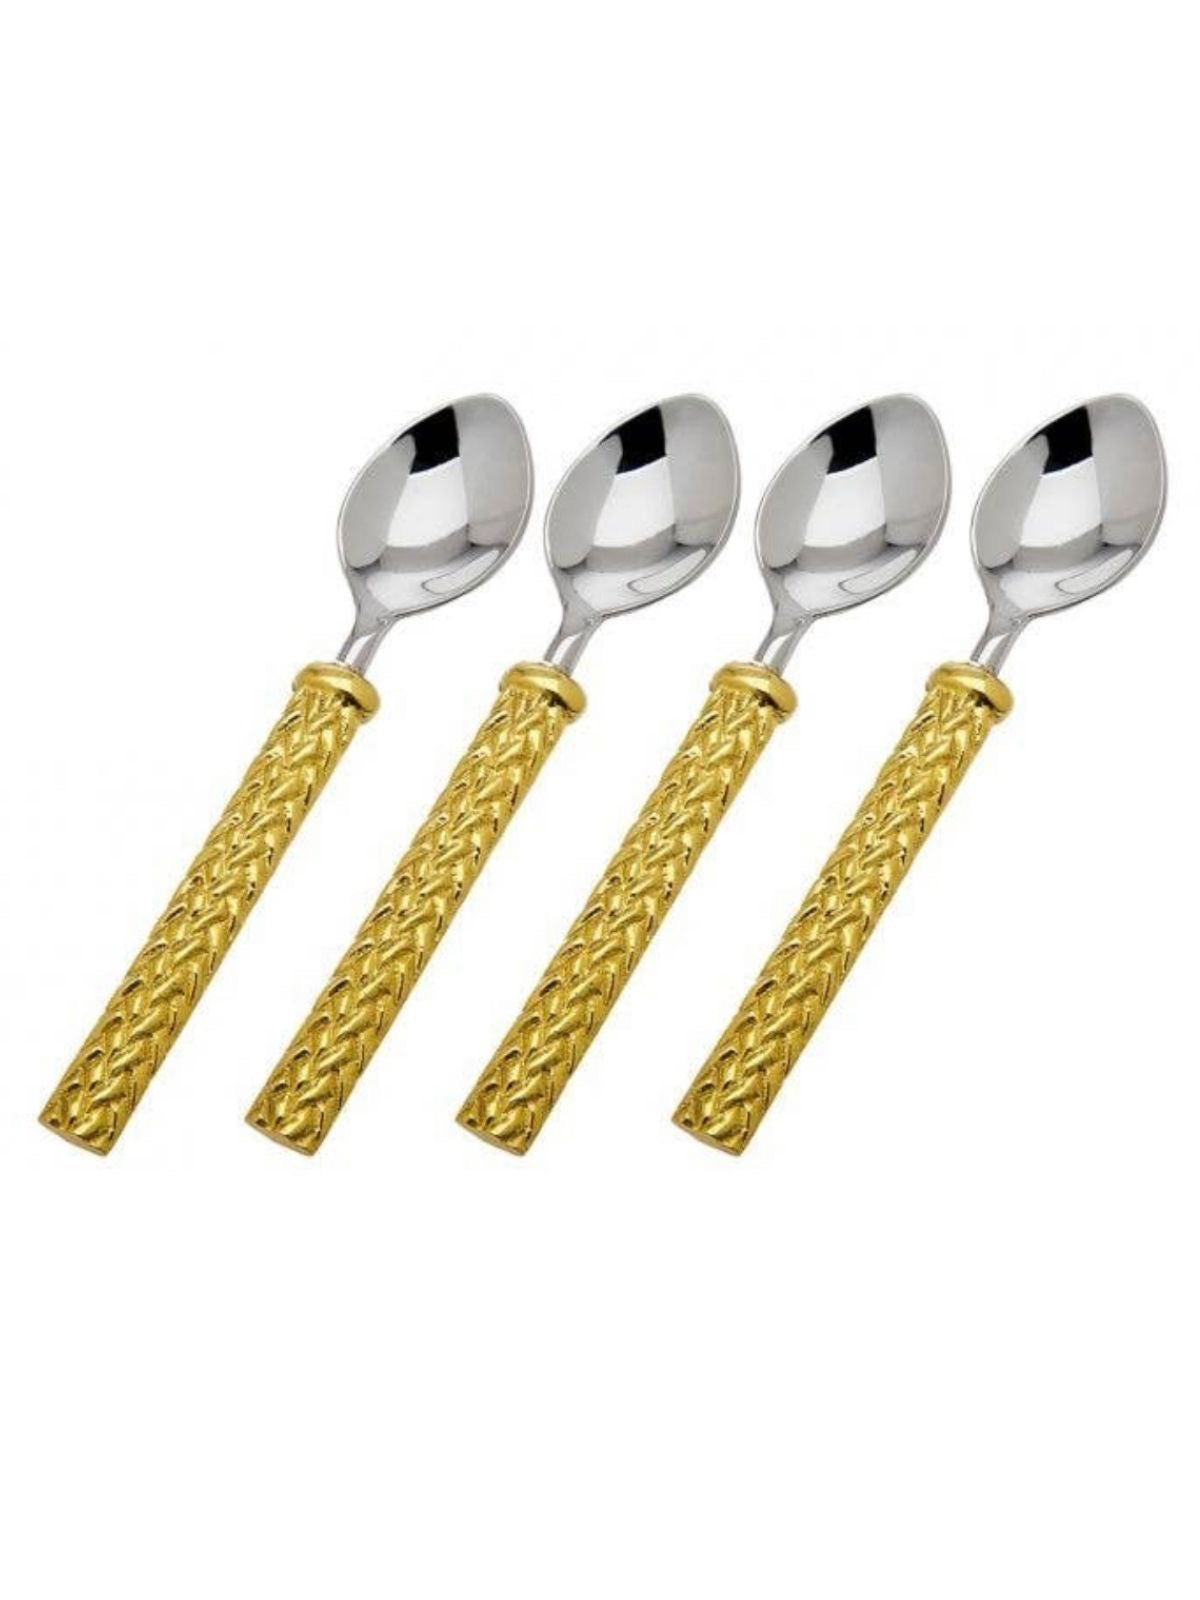 Stainless Steel Dessert Spoons with Gold Mosaic Designed Handles.